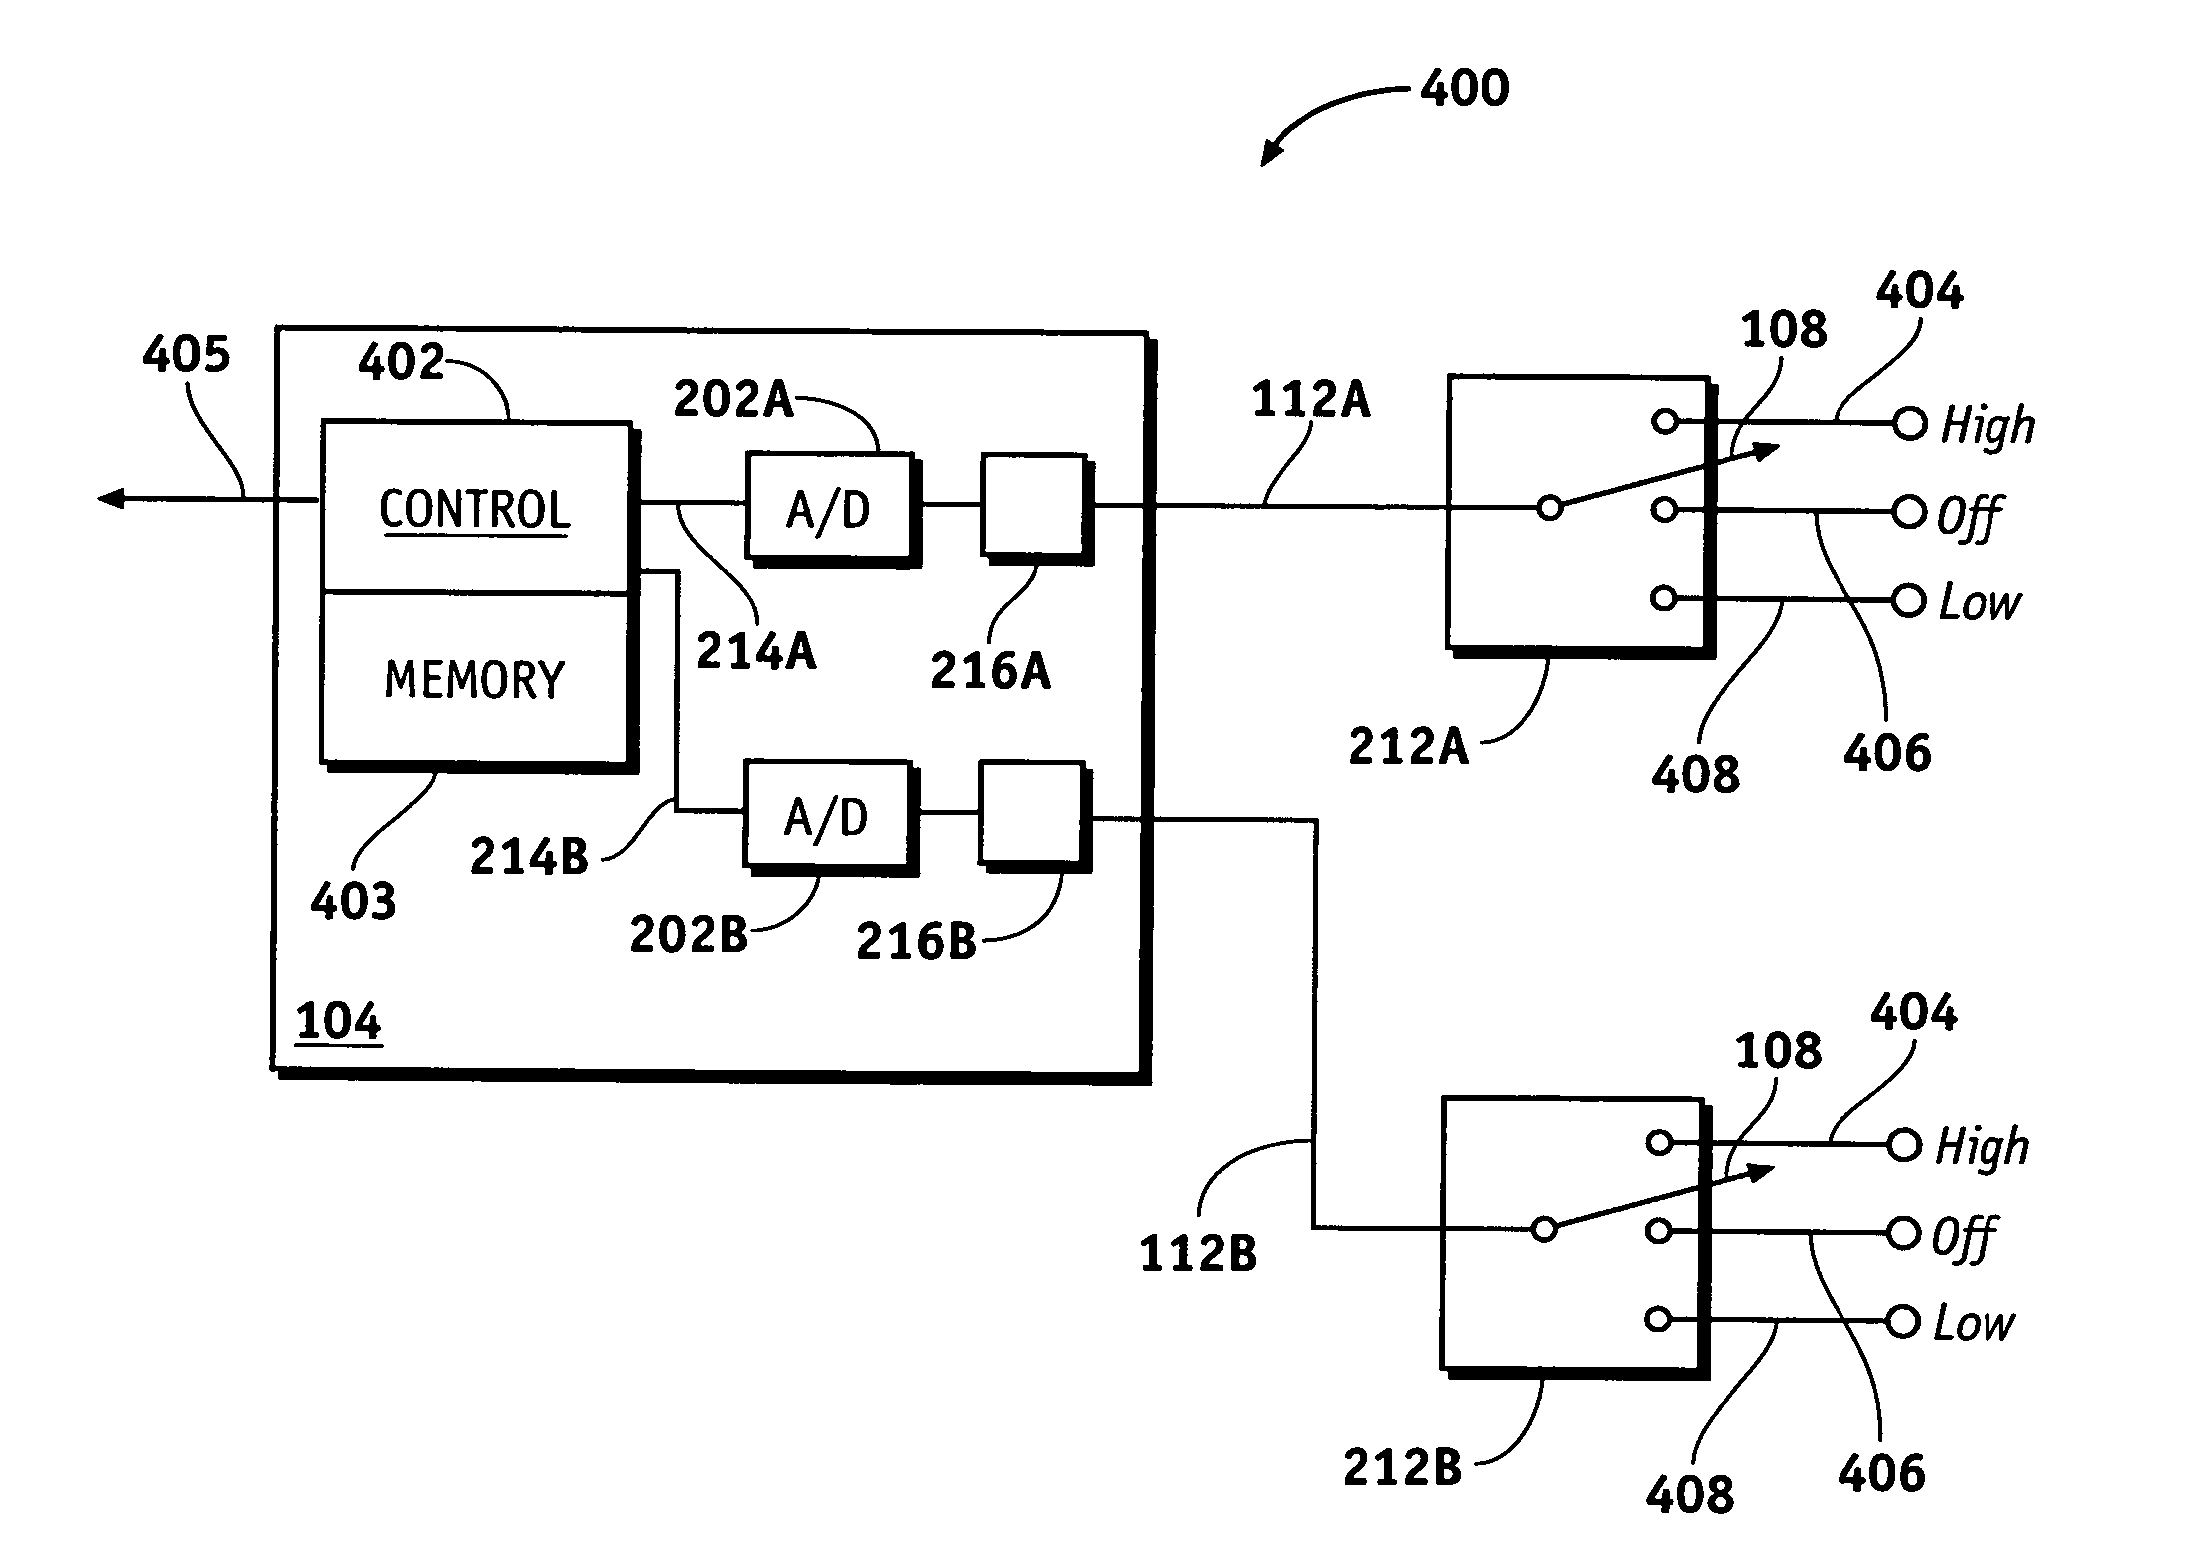 Methods and systems for multi-state switching using multiple ternary switching inputs